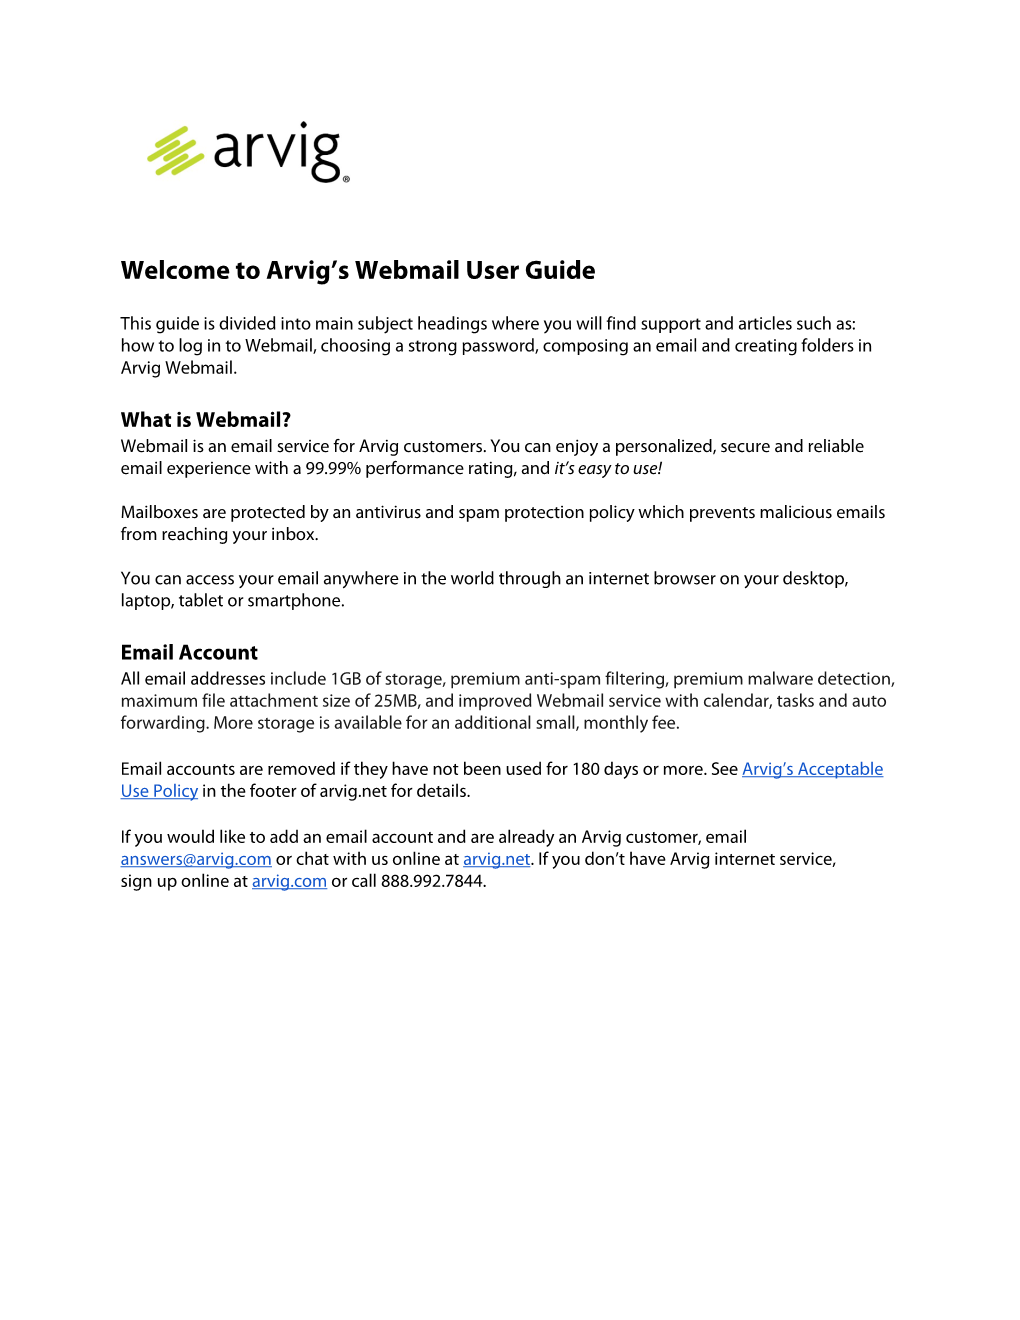 Welcome to Arvig's Webmail User Guide